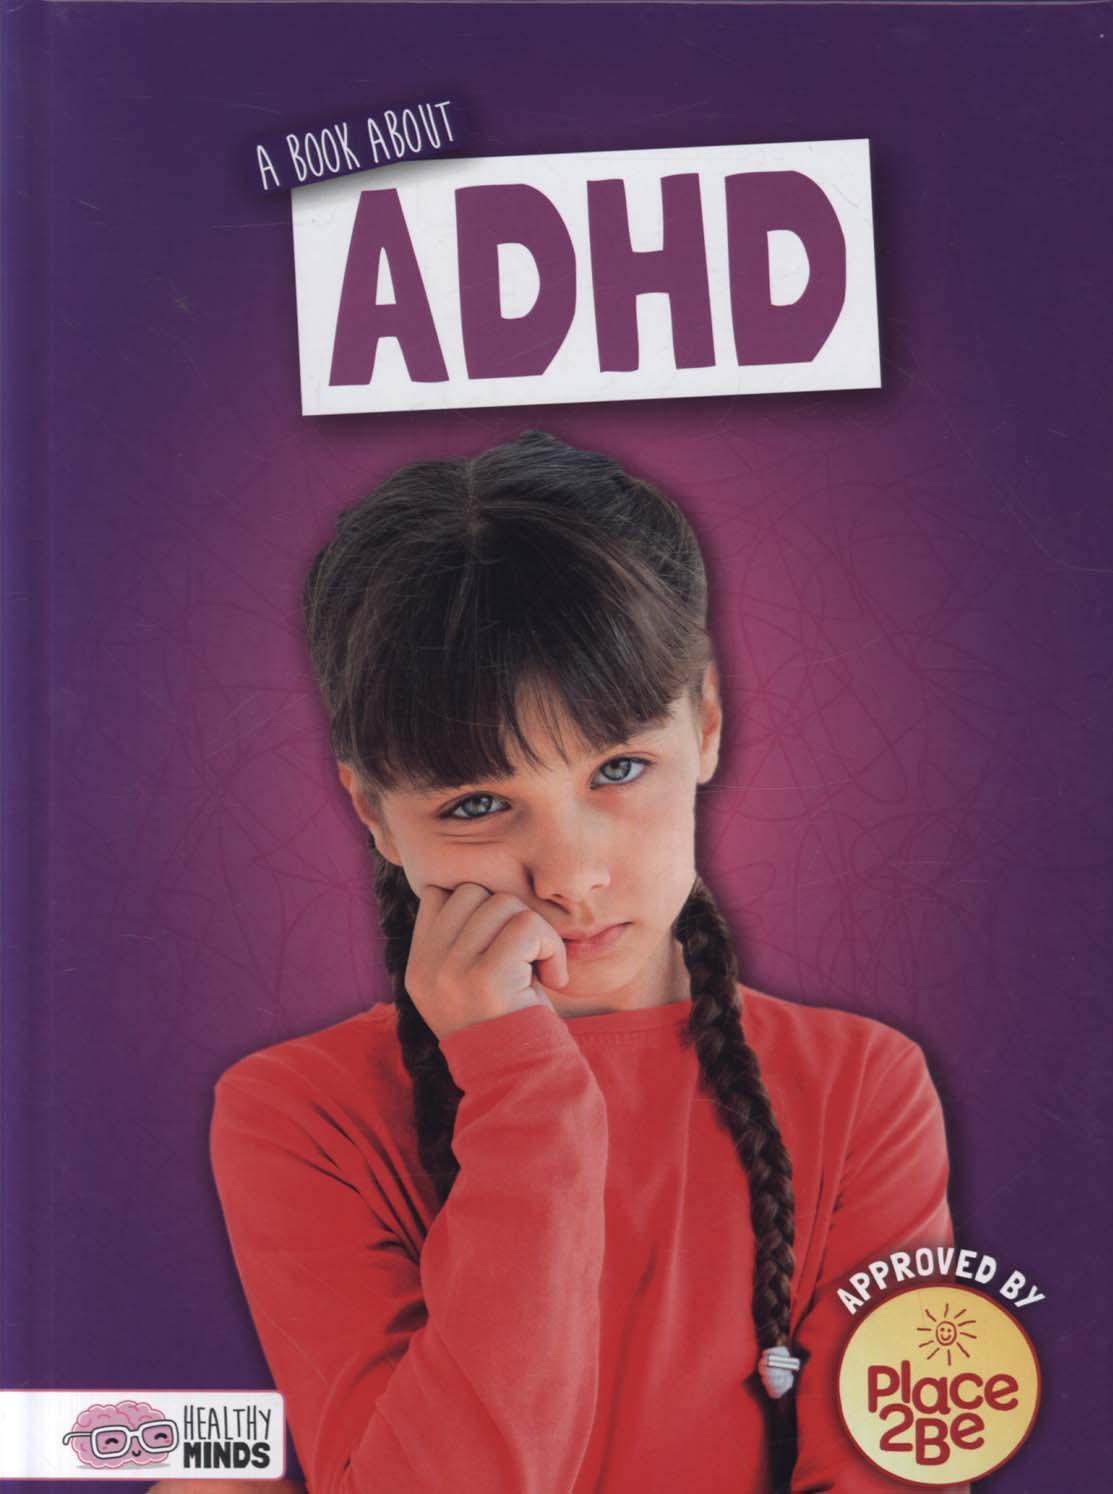 Book About ADHD